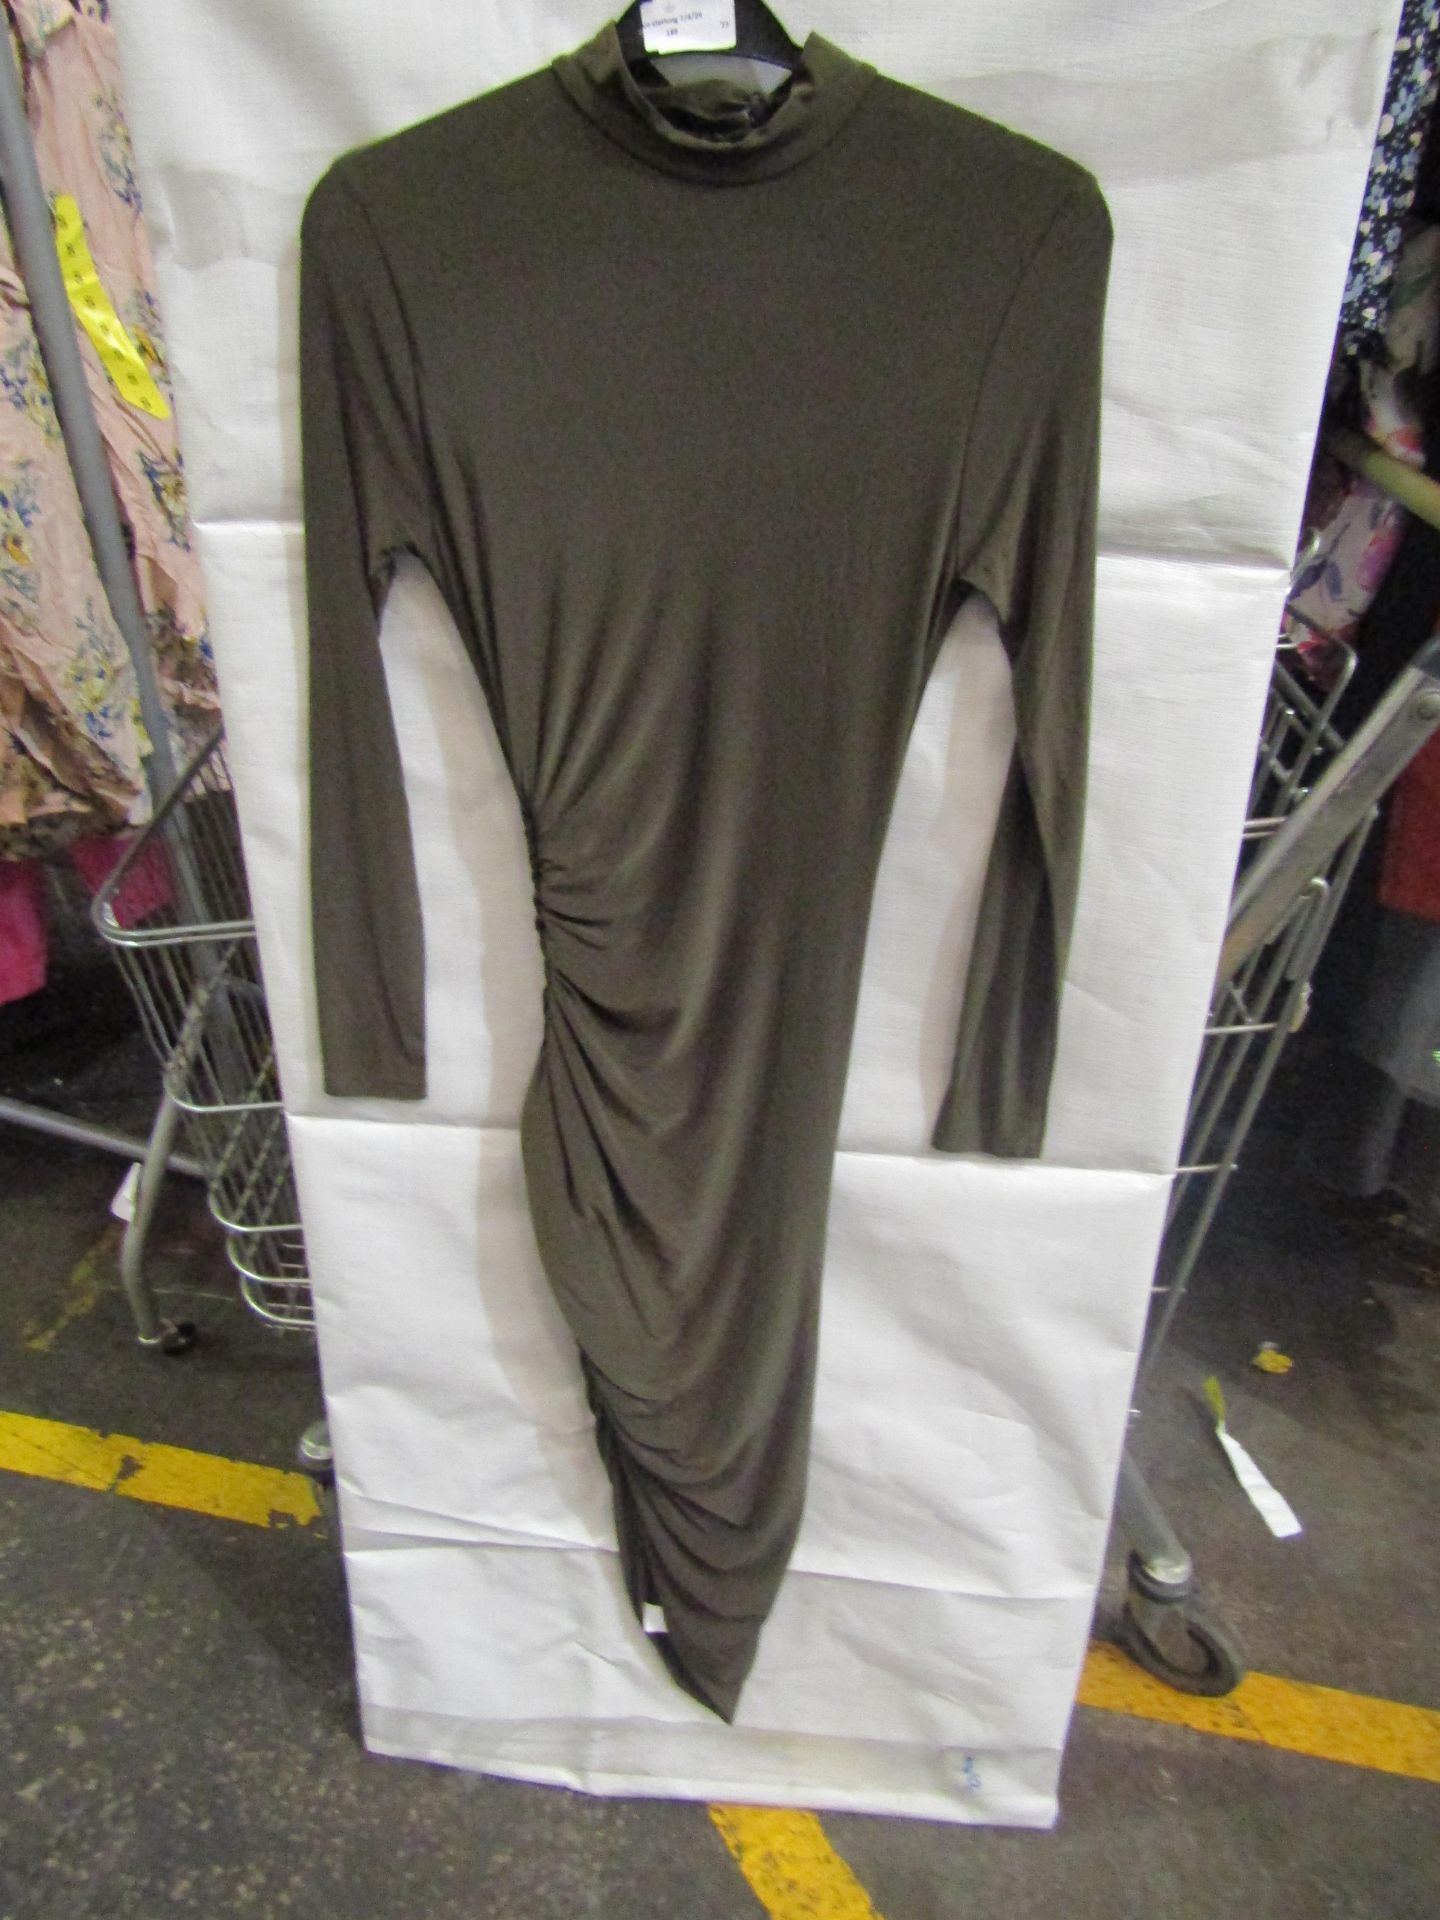 2x Miss Guided - Slinky Rucked Midi Khaki Dress - Size 20 Uk - New With Tags & Packaged. - Image 2 of 2